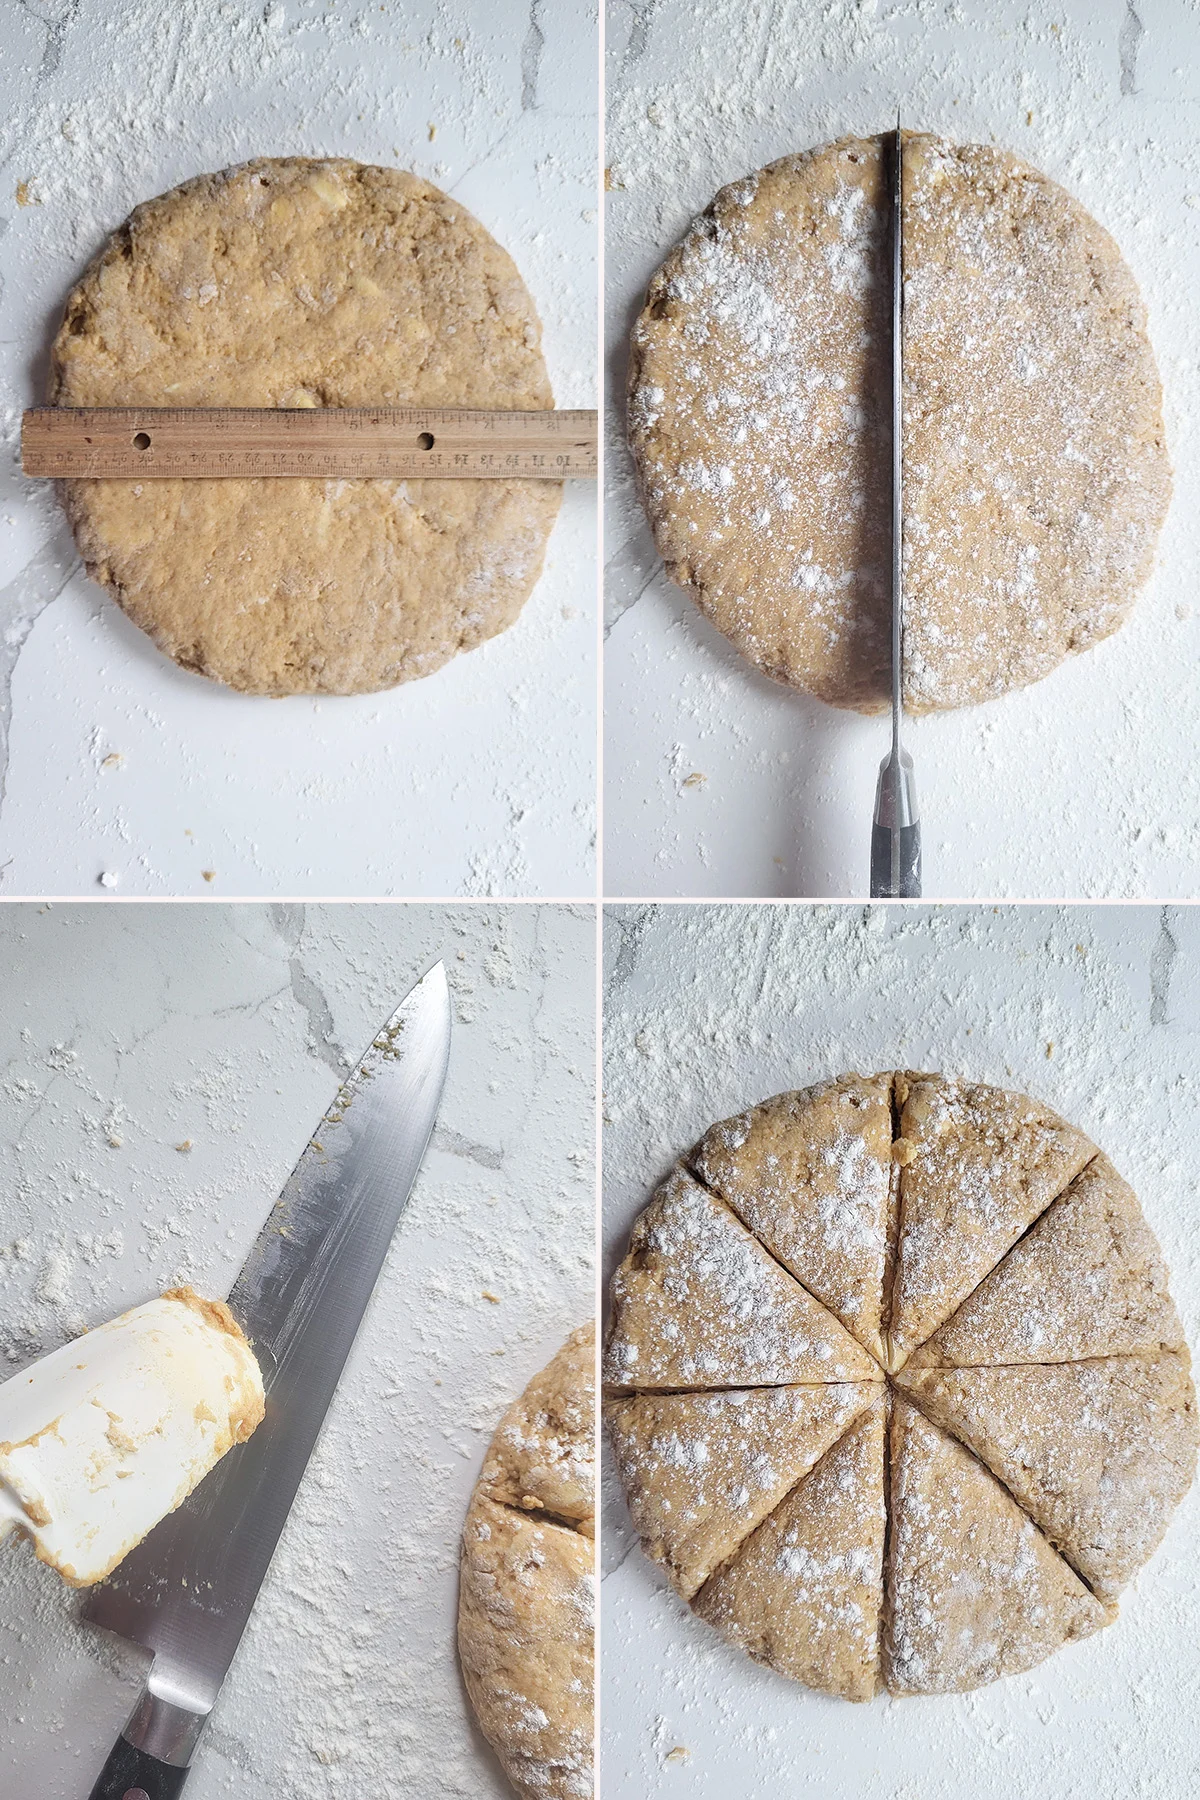 Round of scone dough with a knife and cut wedges. 